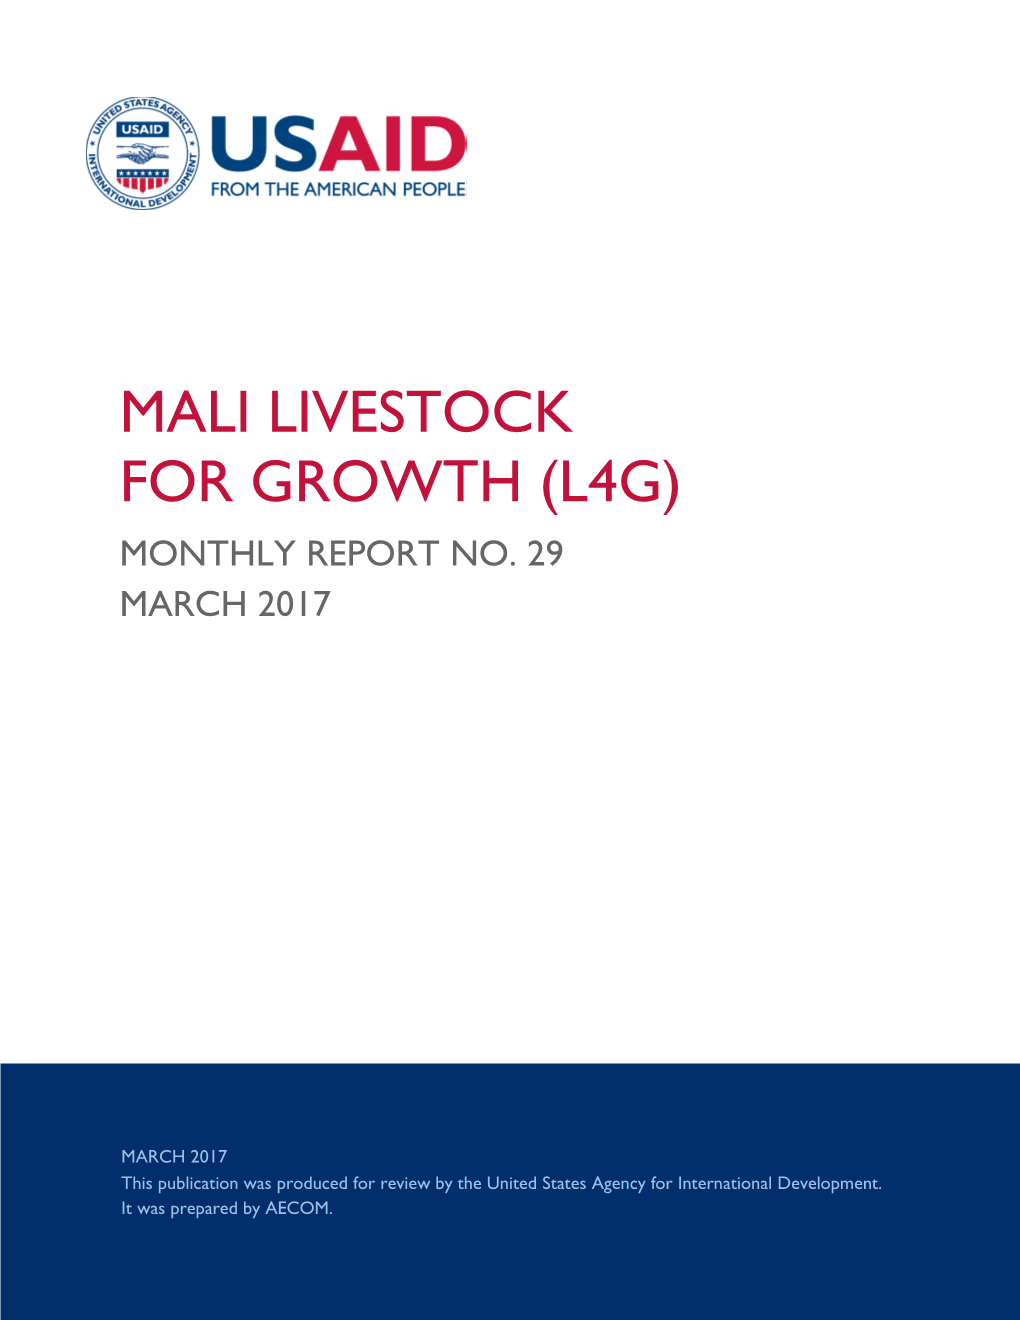 Mali Livestock for Growth (L4g) Monthly Report No